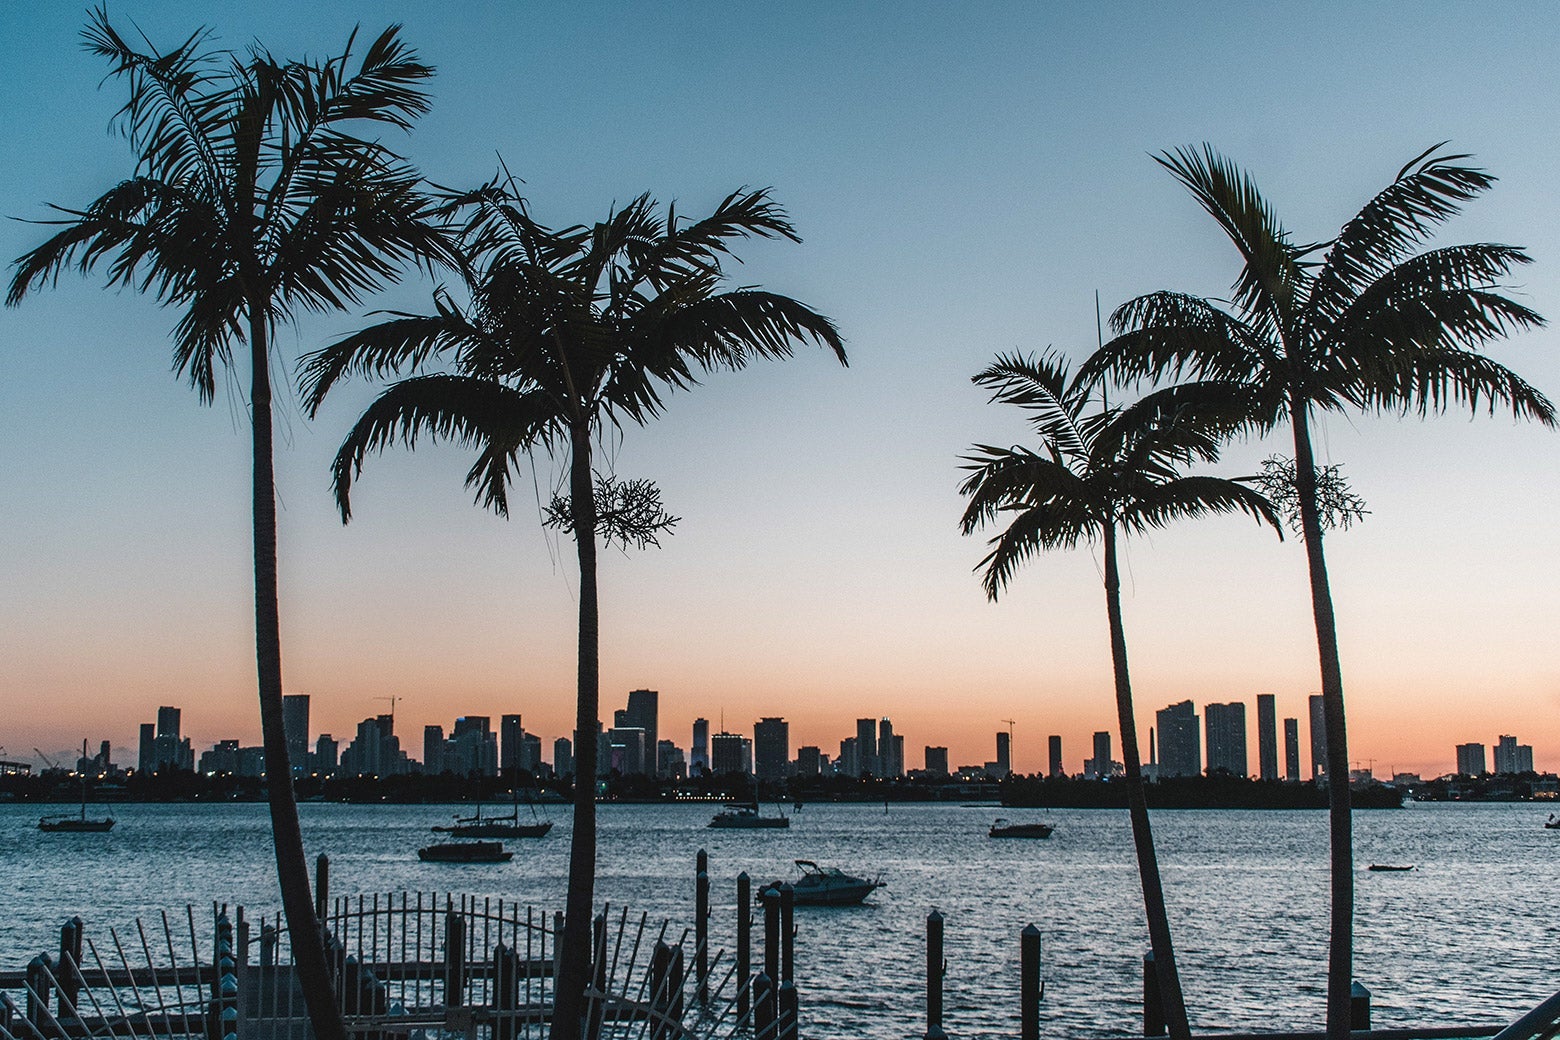 Palm trees and an oceanfront skyline at sunset